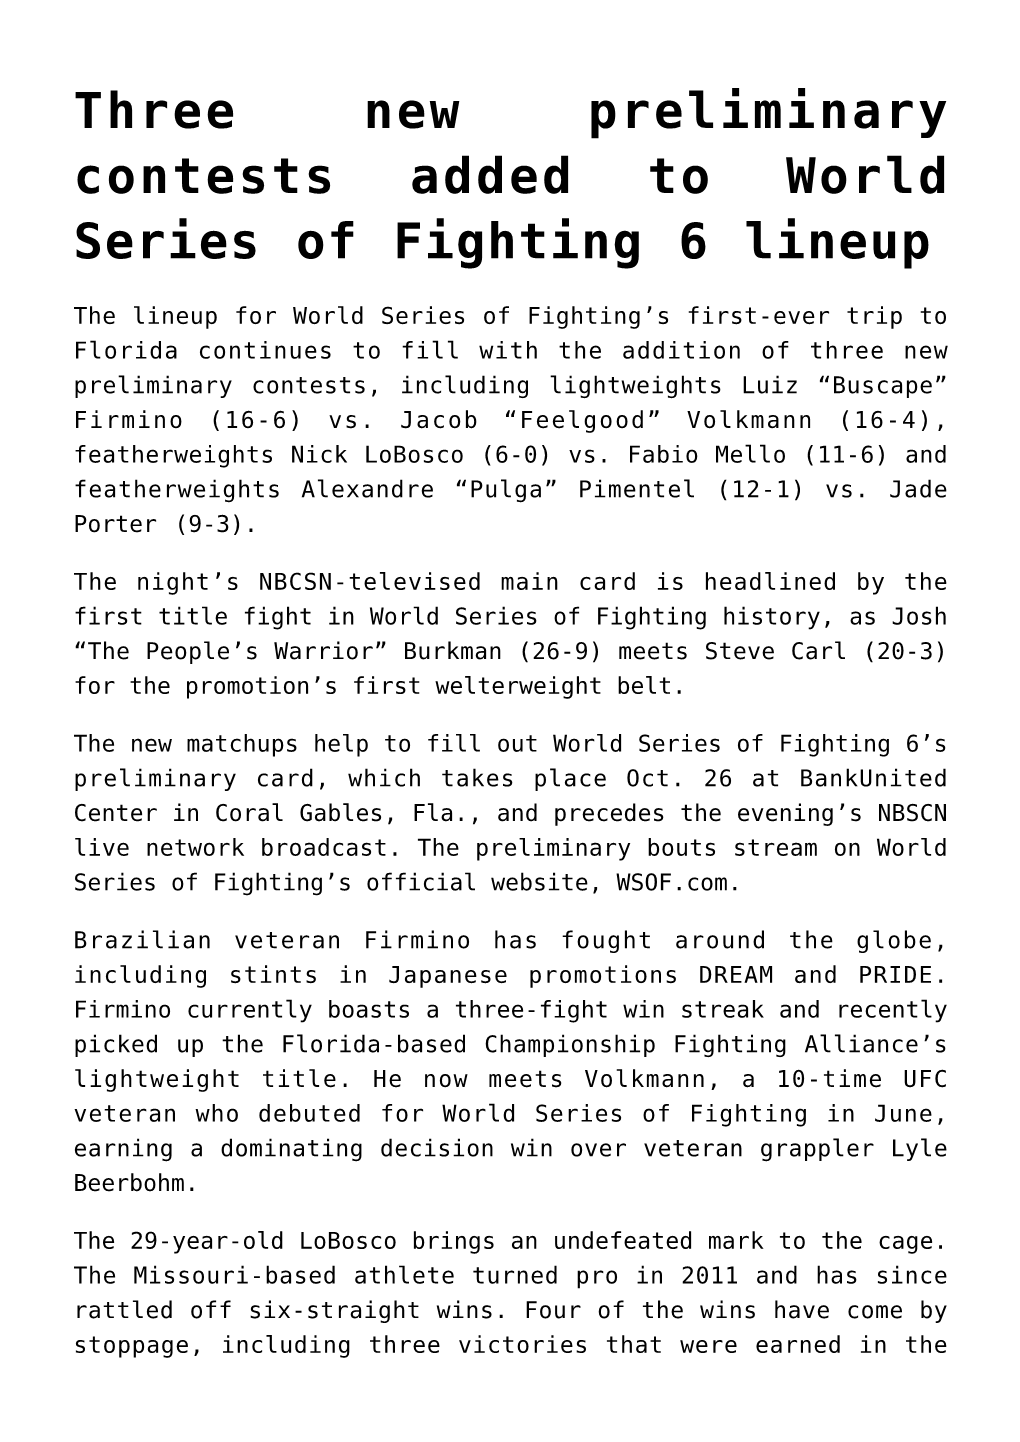 Three New Preliminary Contests Added to World Series of Fighting 6 Lineup